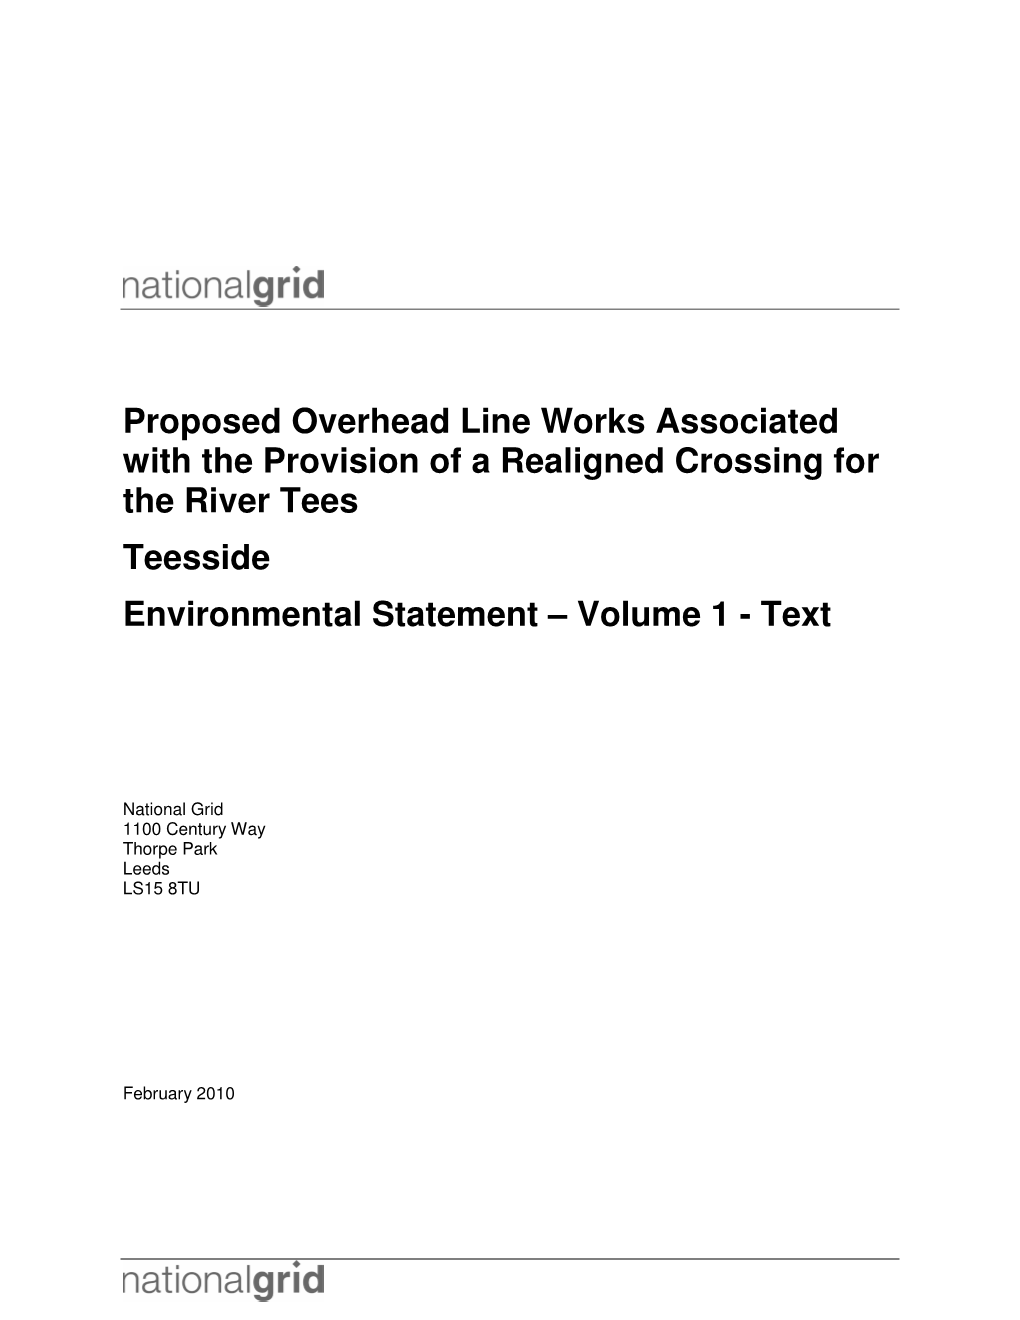 Proposed Overhead Line Works Associated with the Provision of a Realigned Crossing for the River Tees Teesside Environmental Statement – Volume 1 - Text